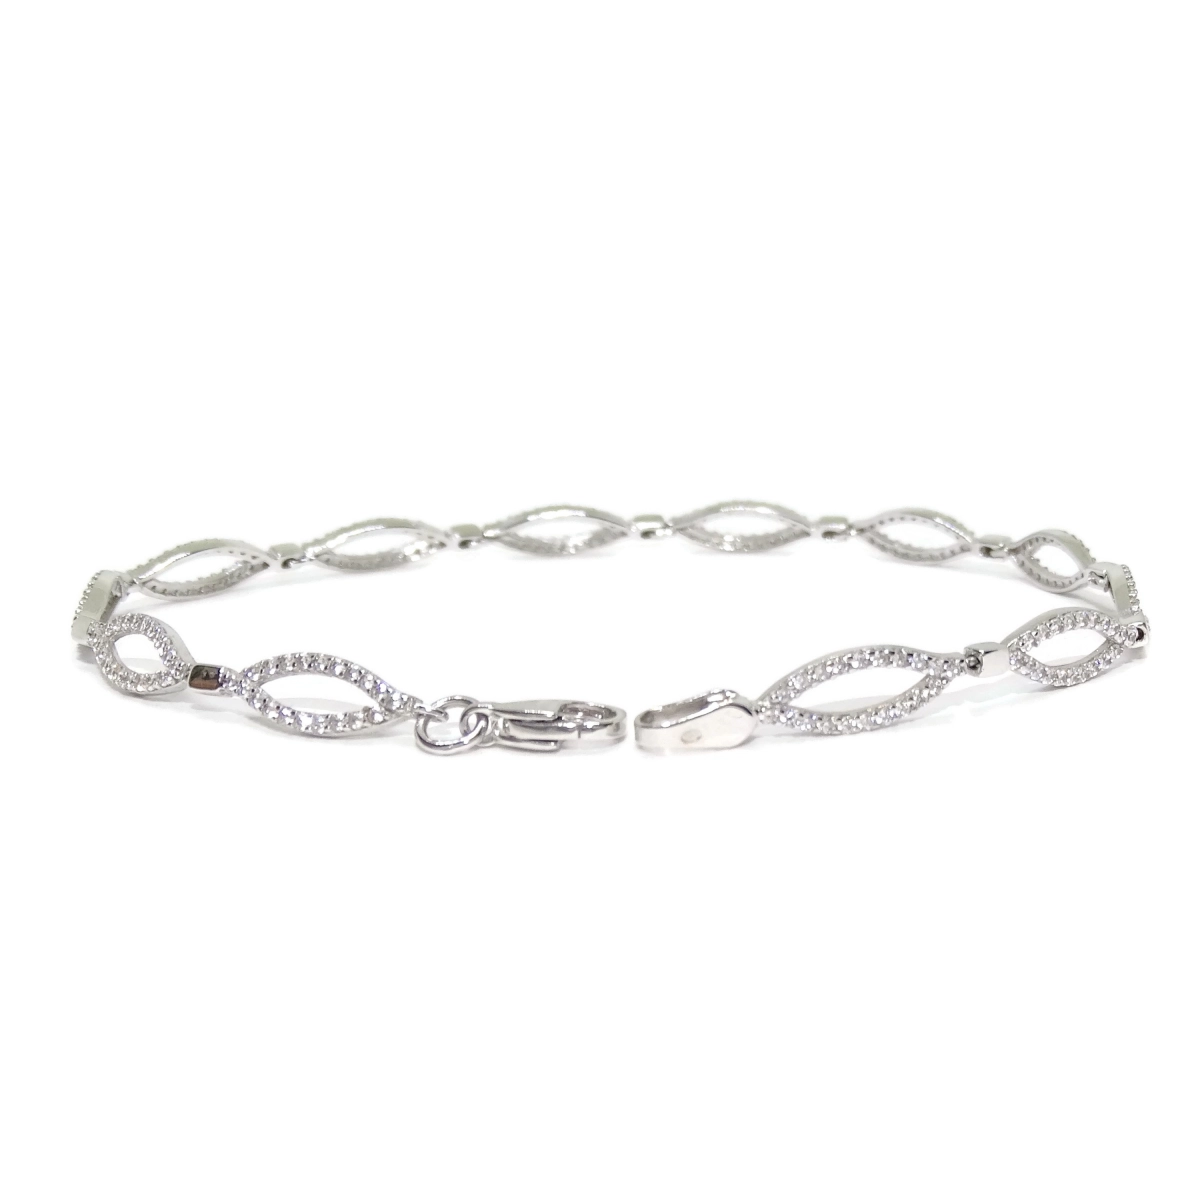 BRACELET IN 18K WHITE GOLD FOR WOMEN WITH ZIRCONS OF THE BEST QUALITY FORMING �VALUE NEVER SAY NEVER